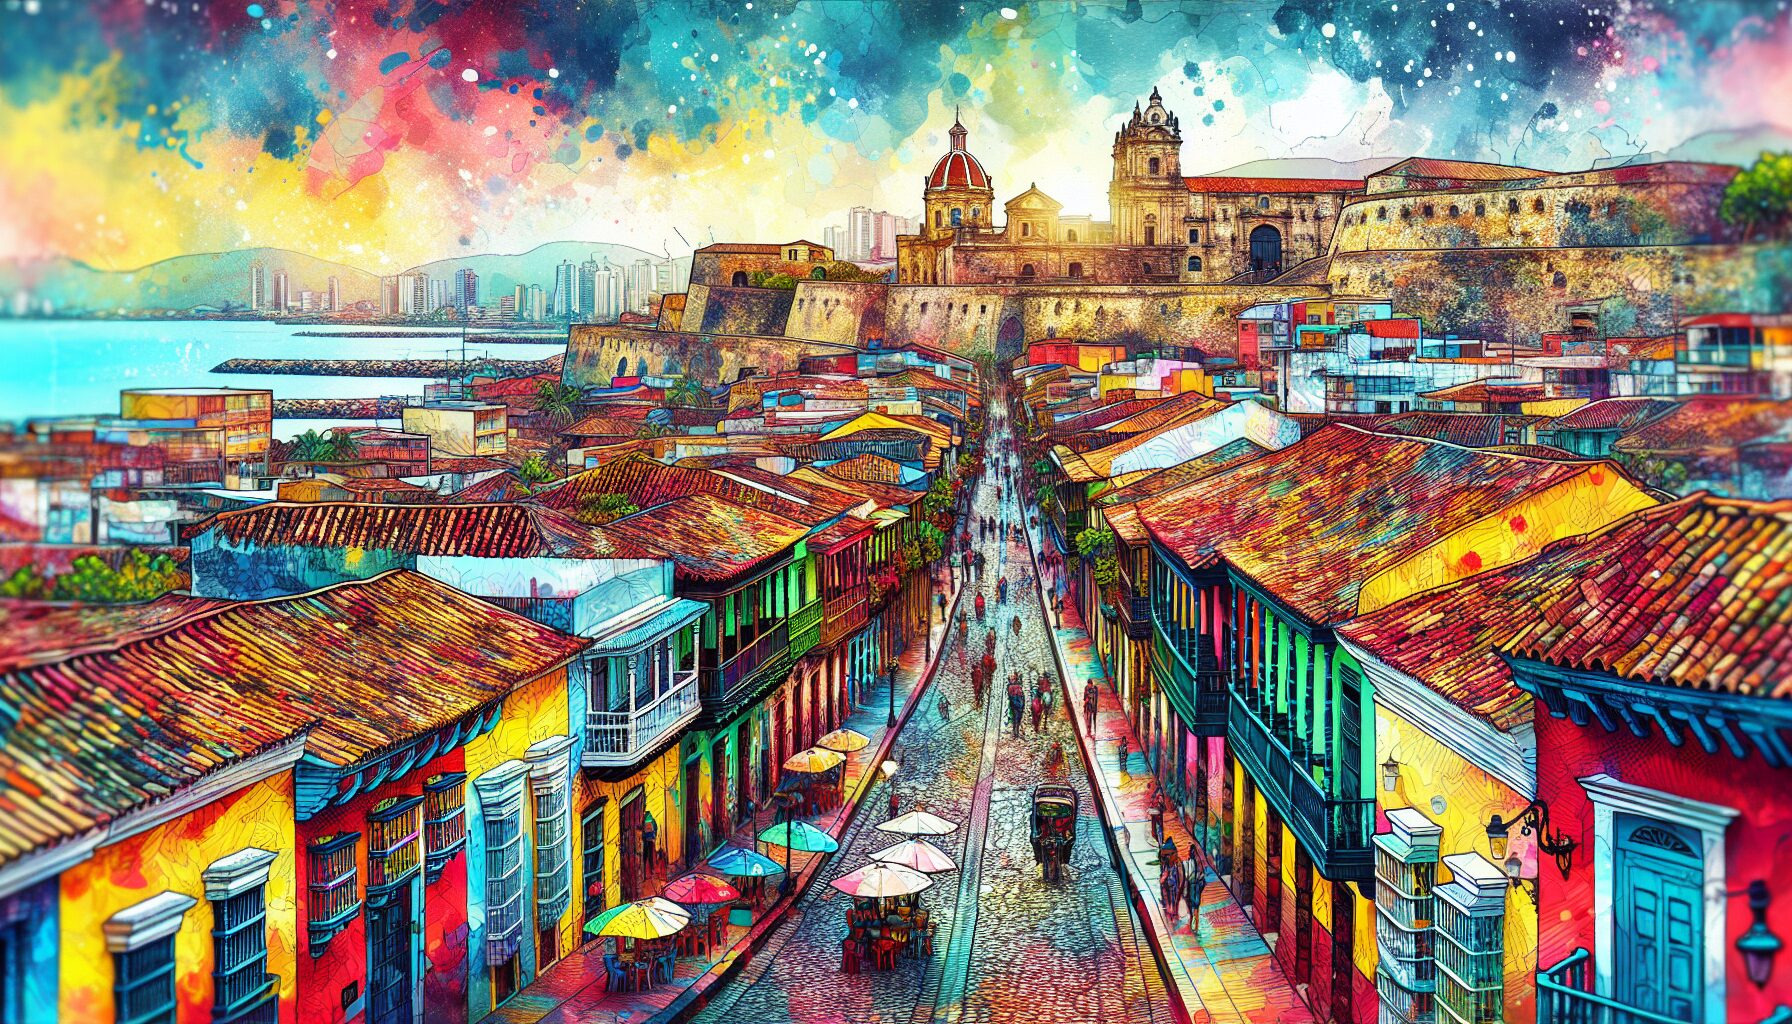 Illustration of the historic walled city of Cartagena